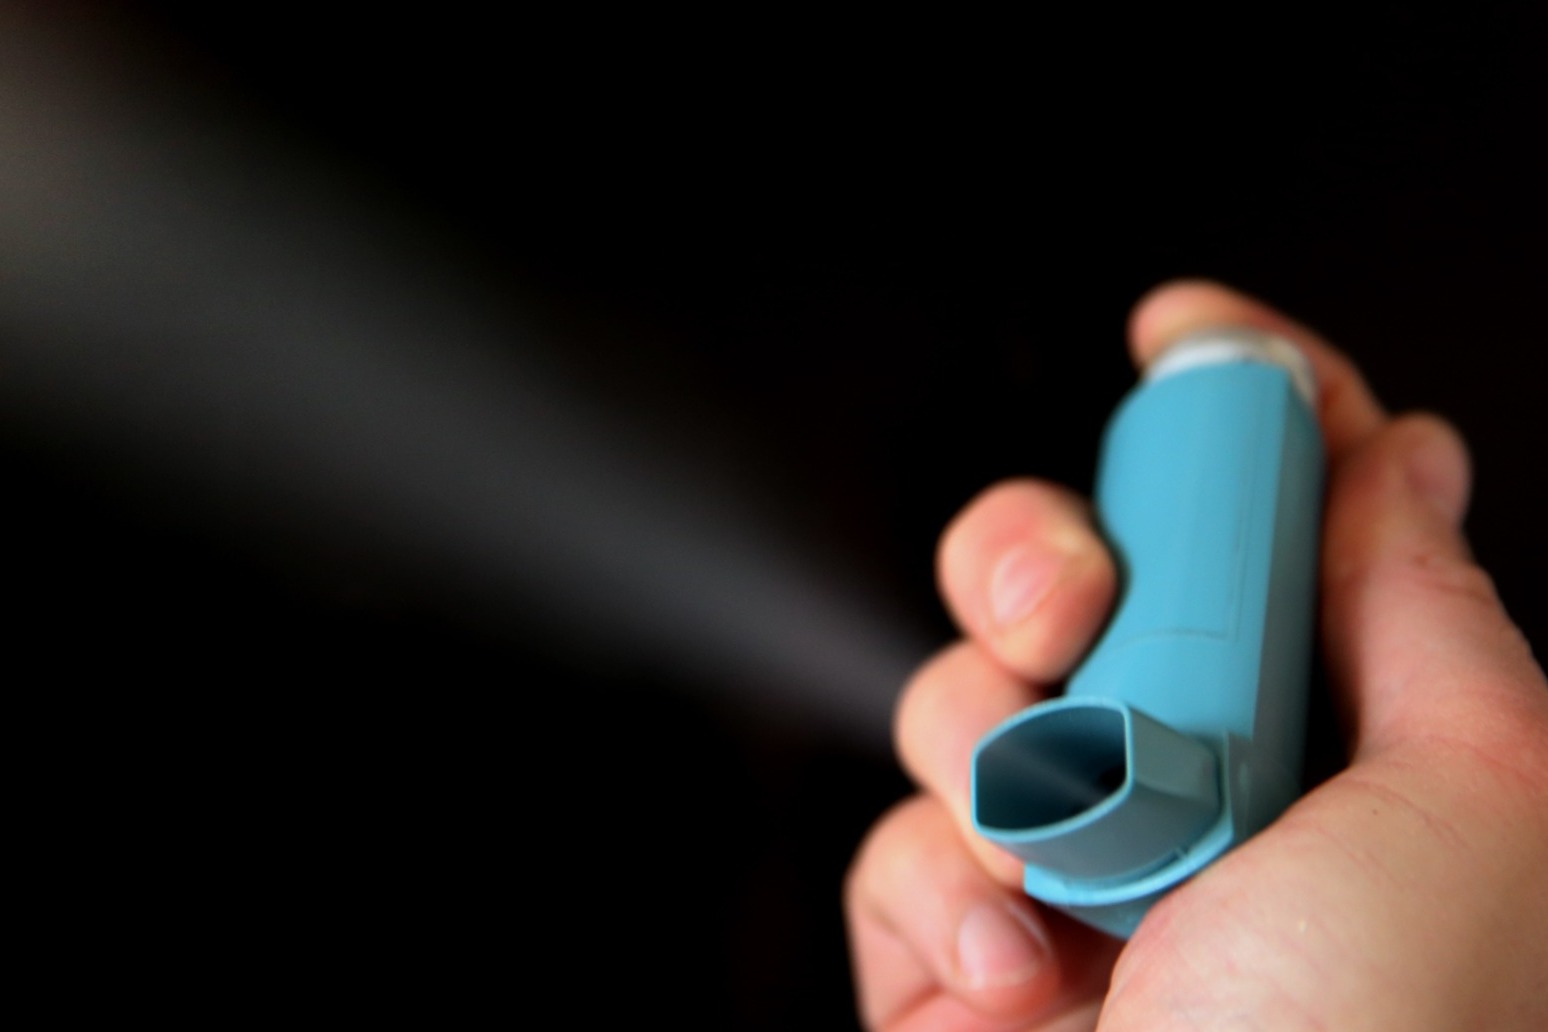 Million asthma patients over-reliant on reliever inhalers, charity warns 